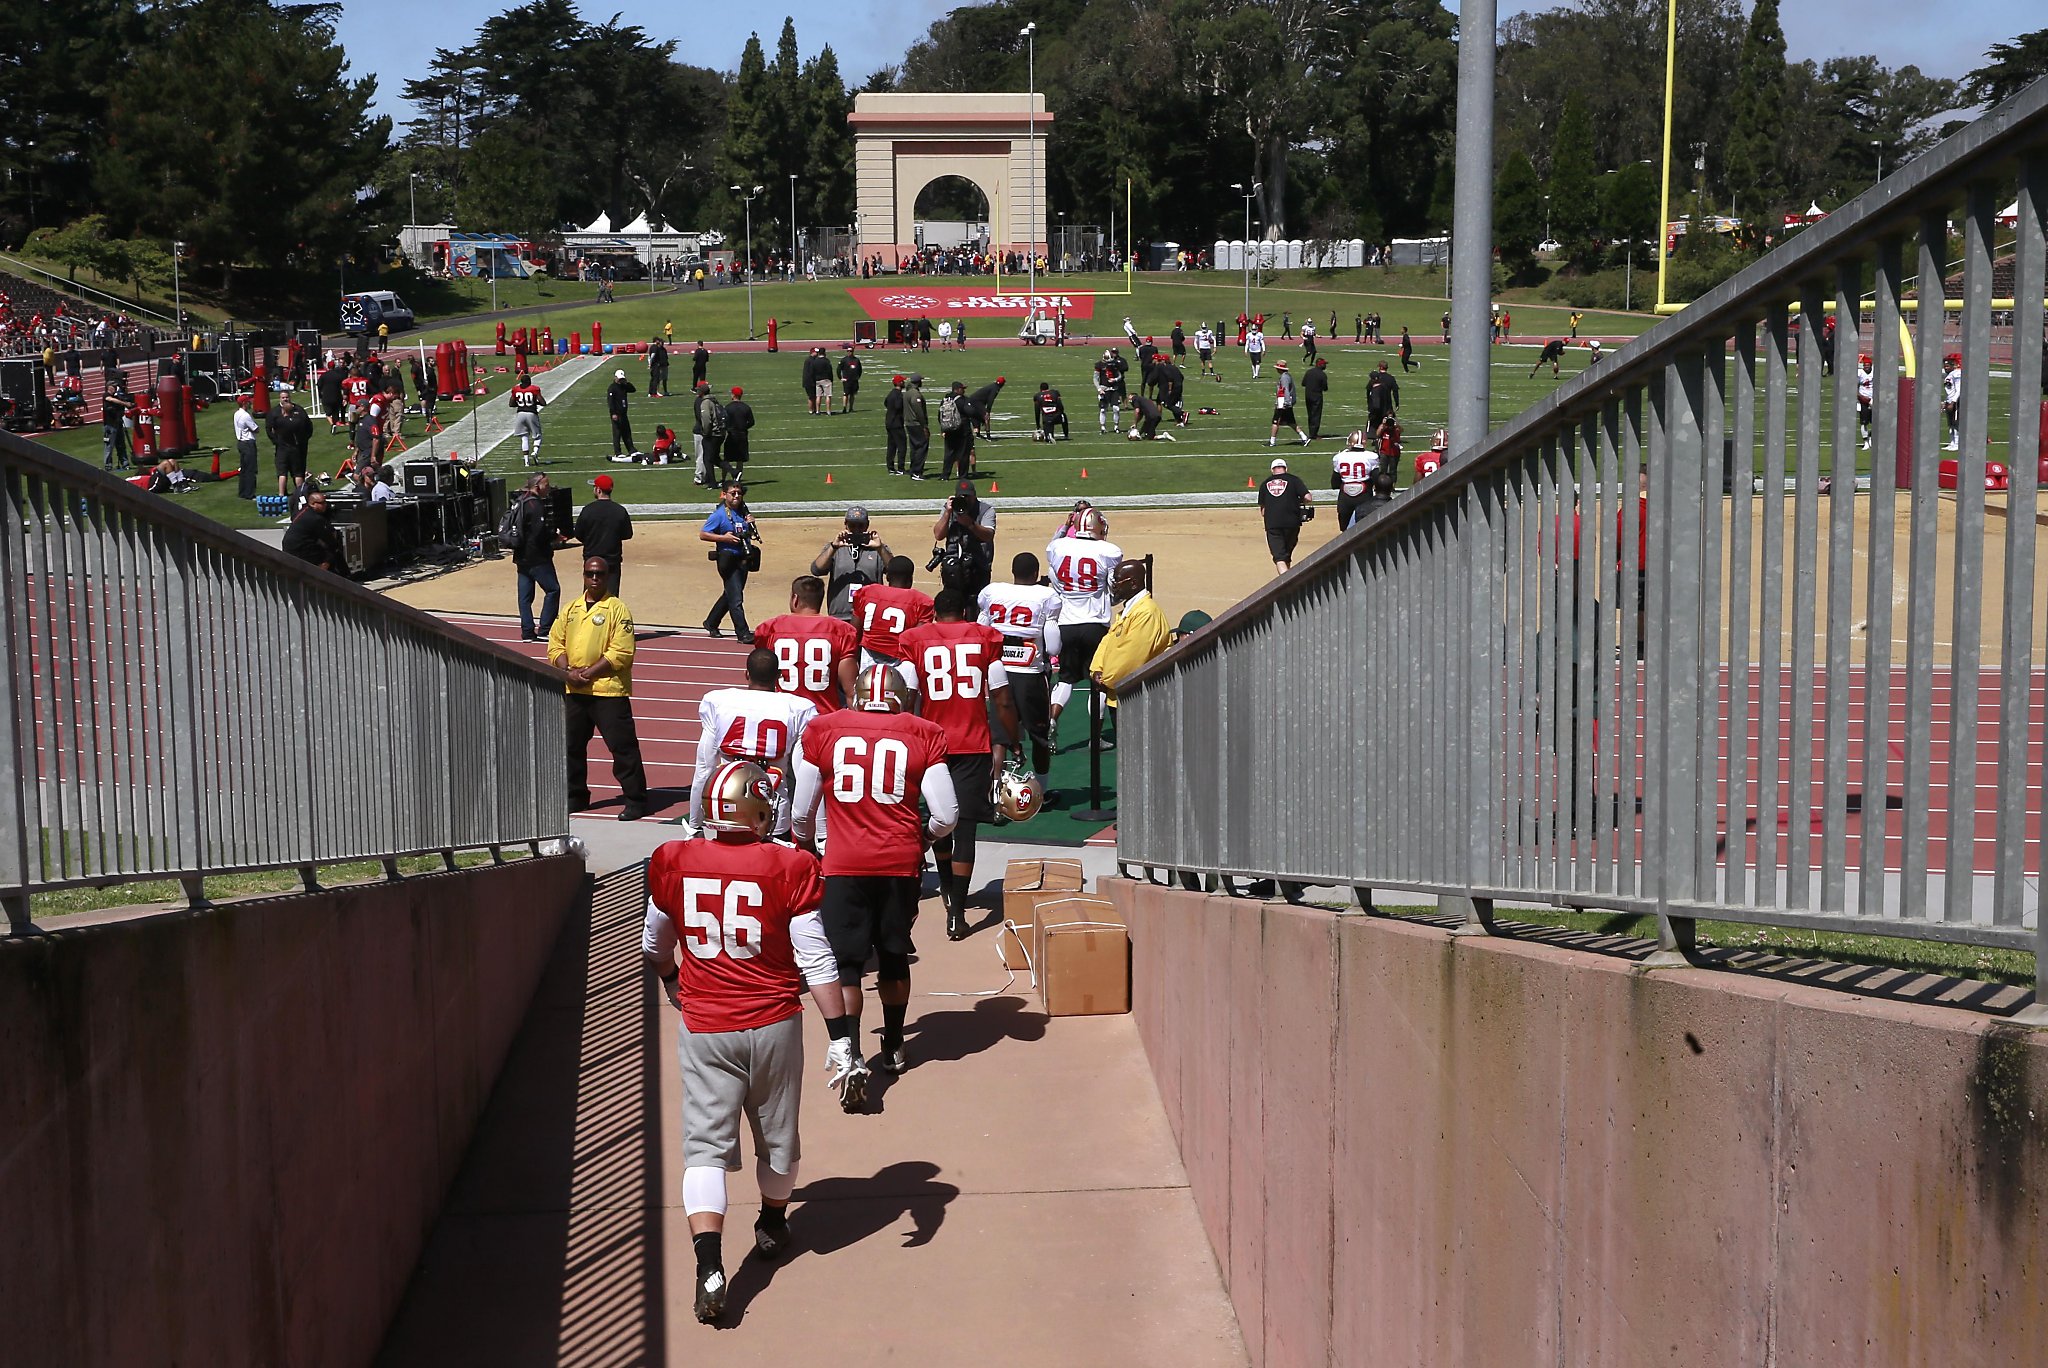 Welcome back to San Francisco: 49ers practice at Kezar Stadium - SFGate